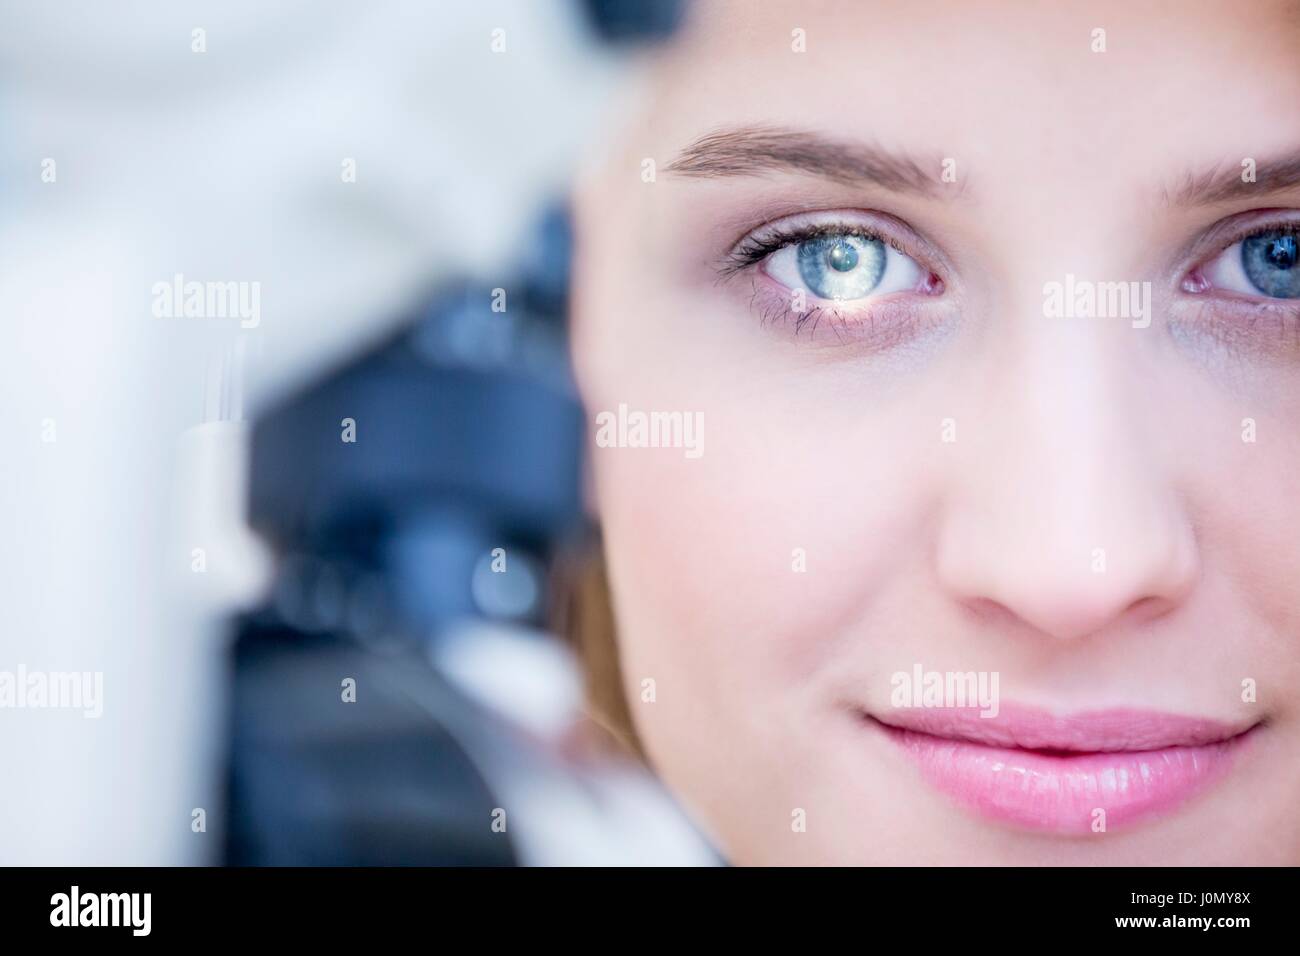 Woman sitting in front of slit lamp for eye examination. Stock Photo